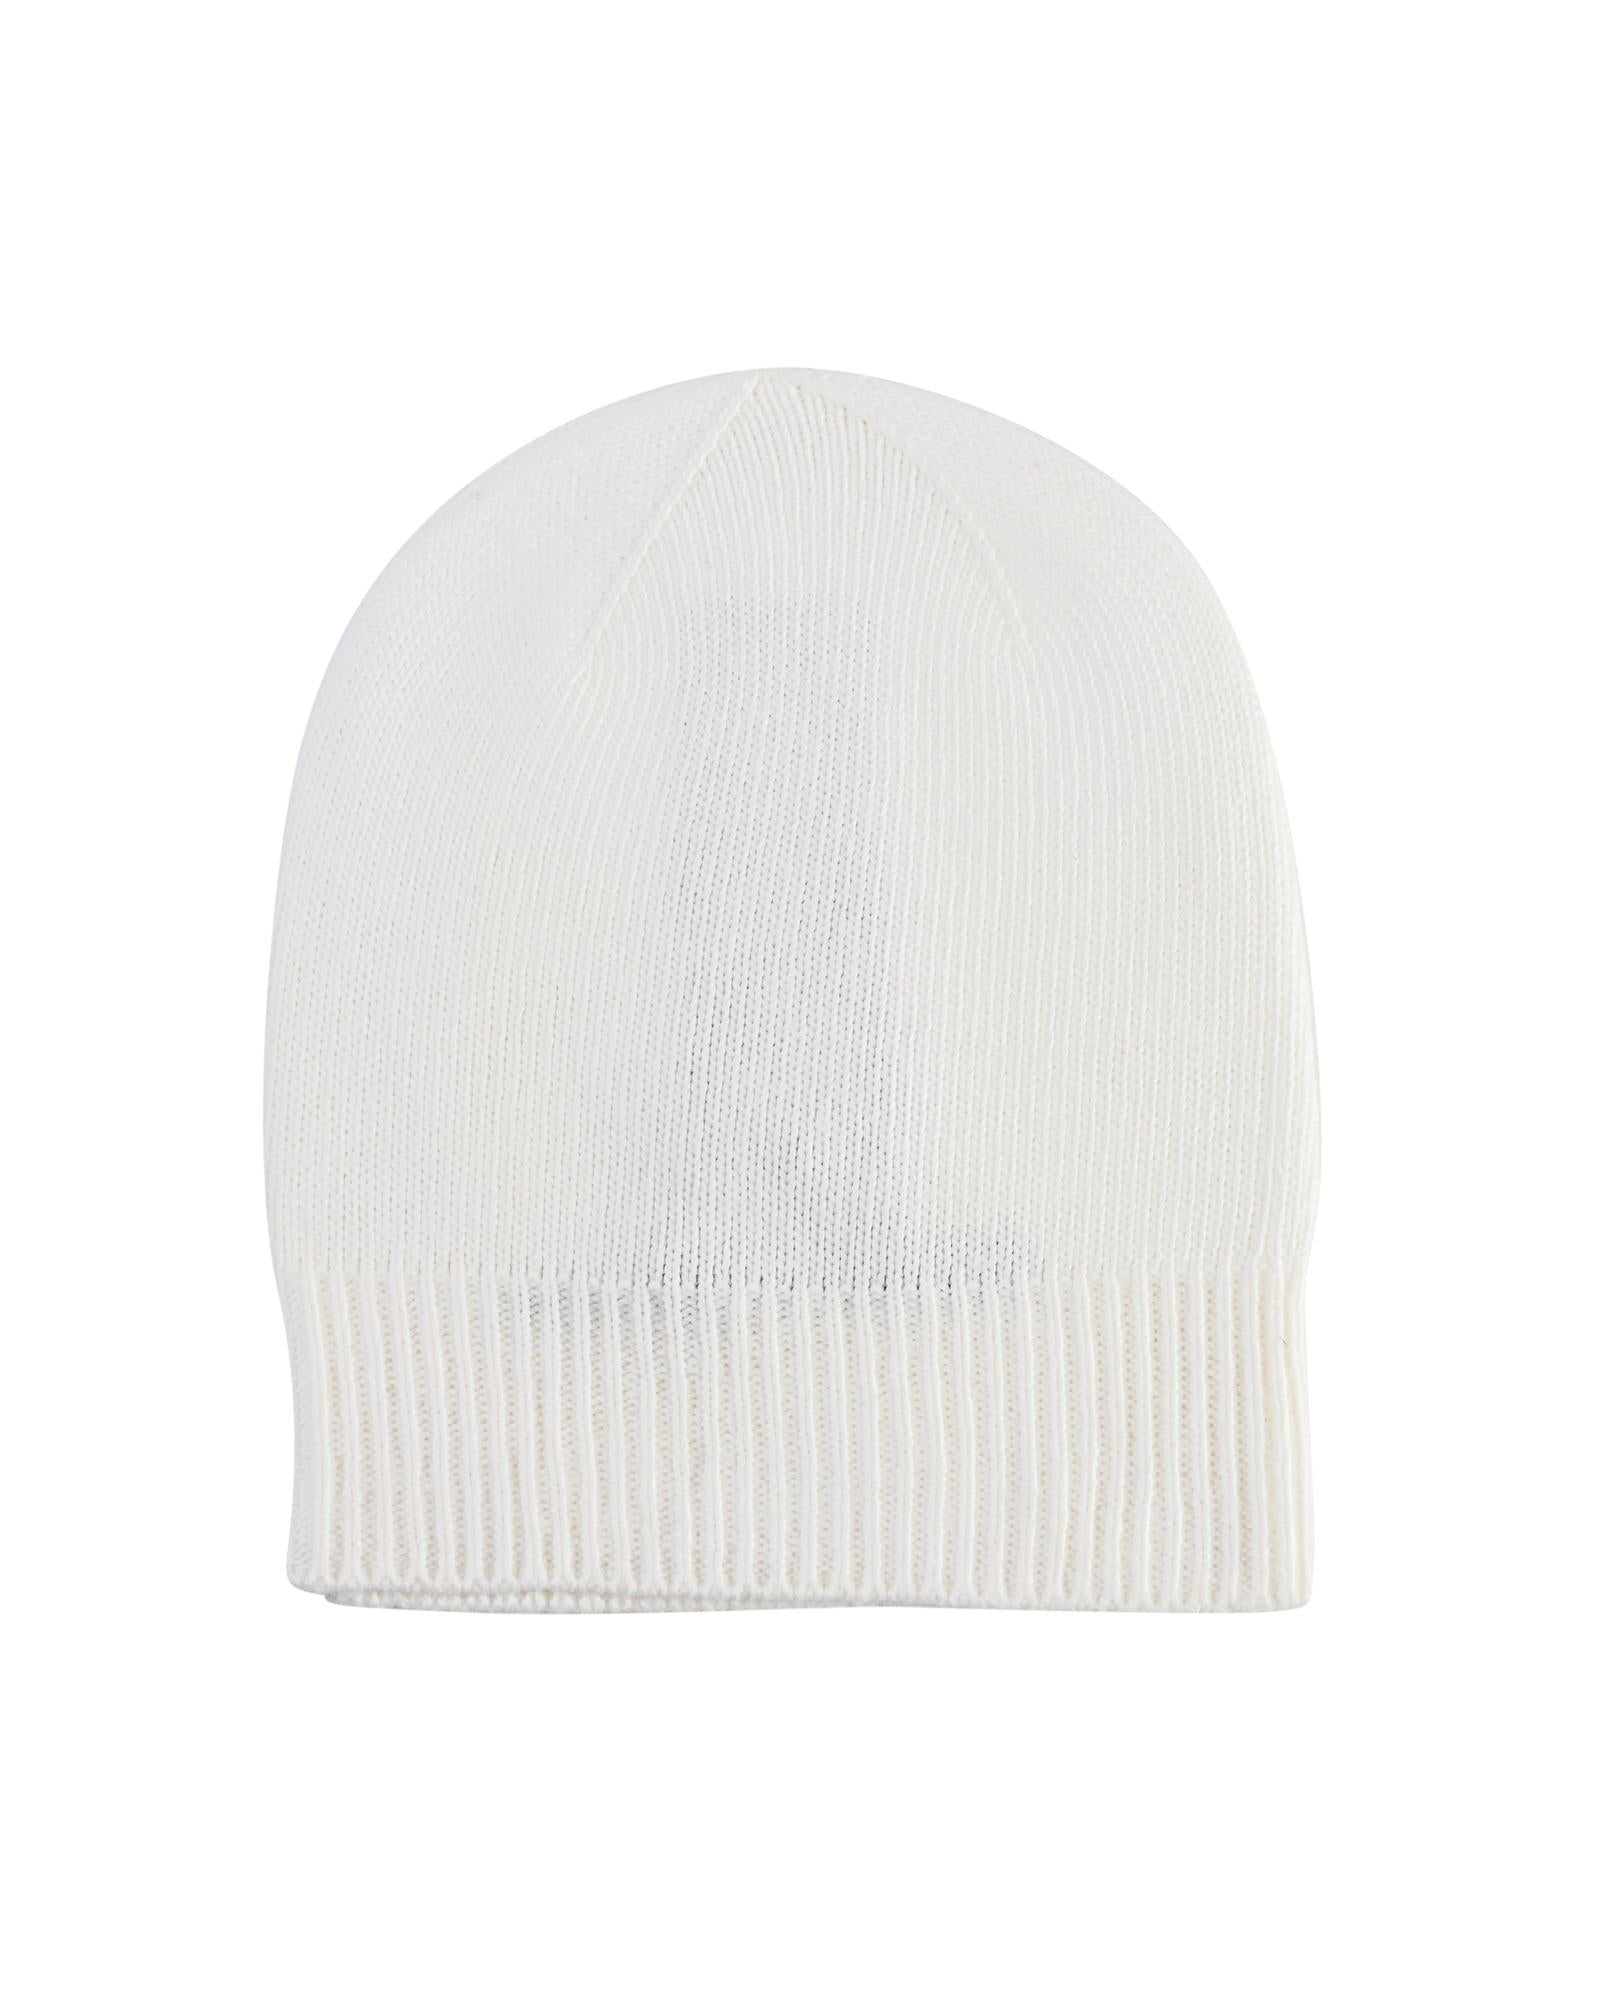 Cashmere Womens Cuffed Beanie Hat - One Size